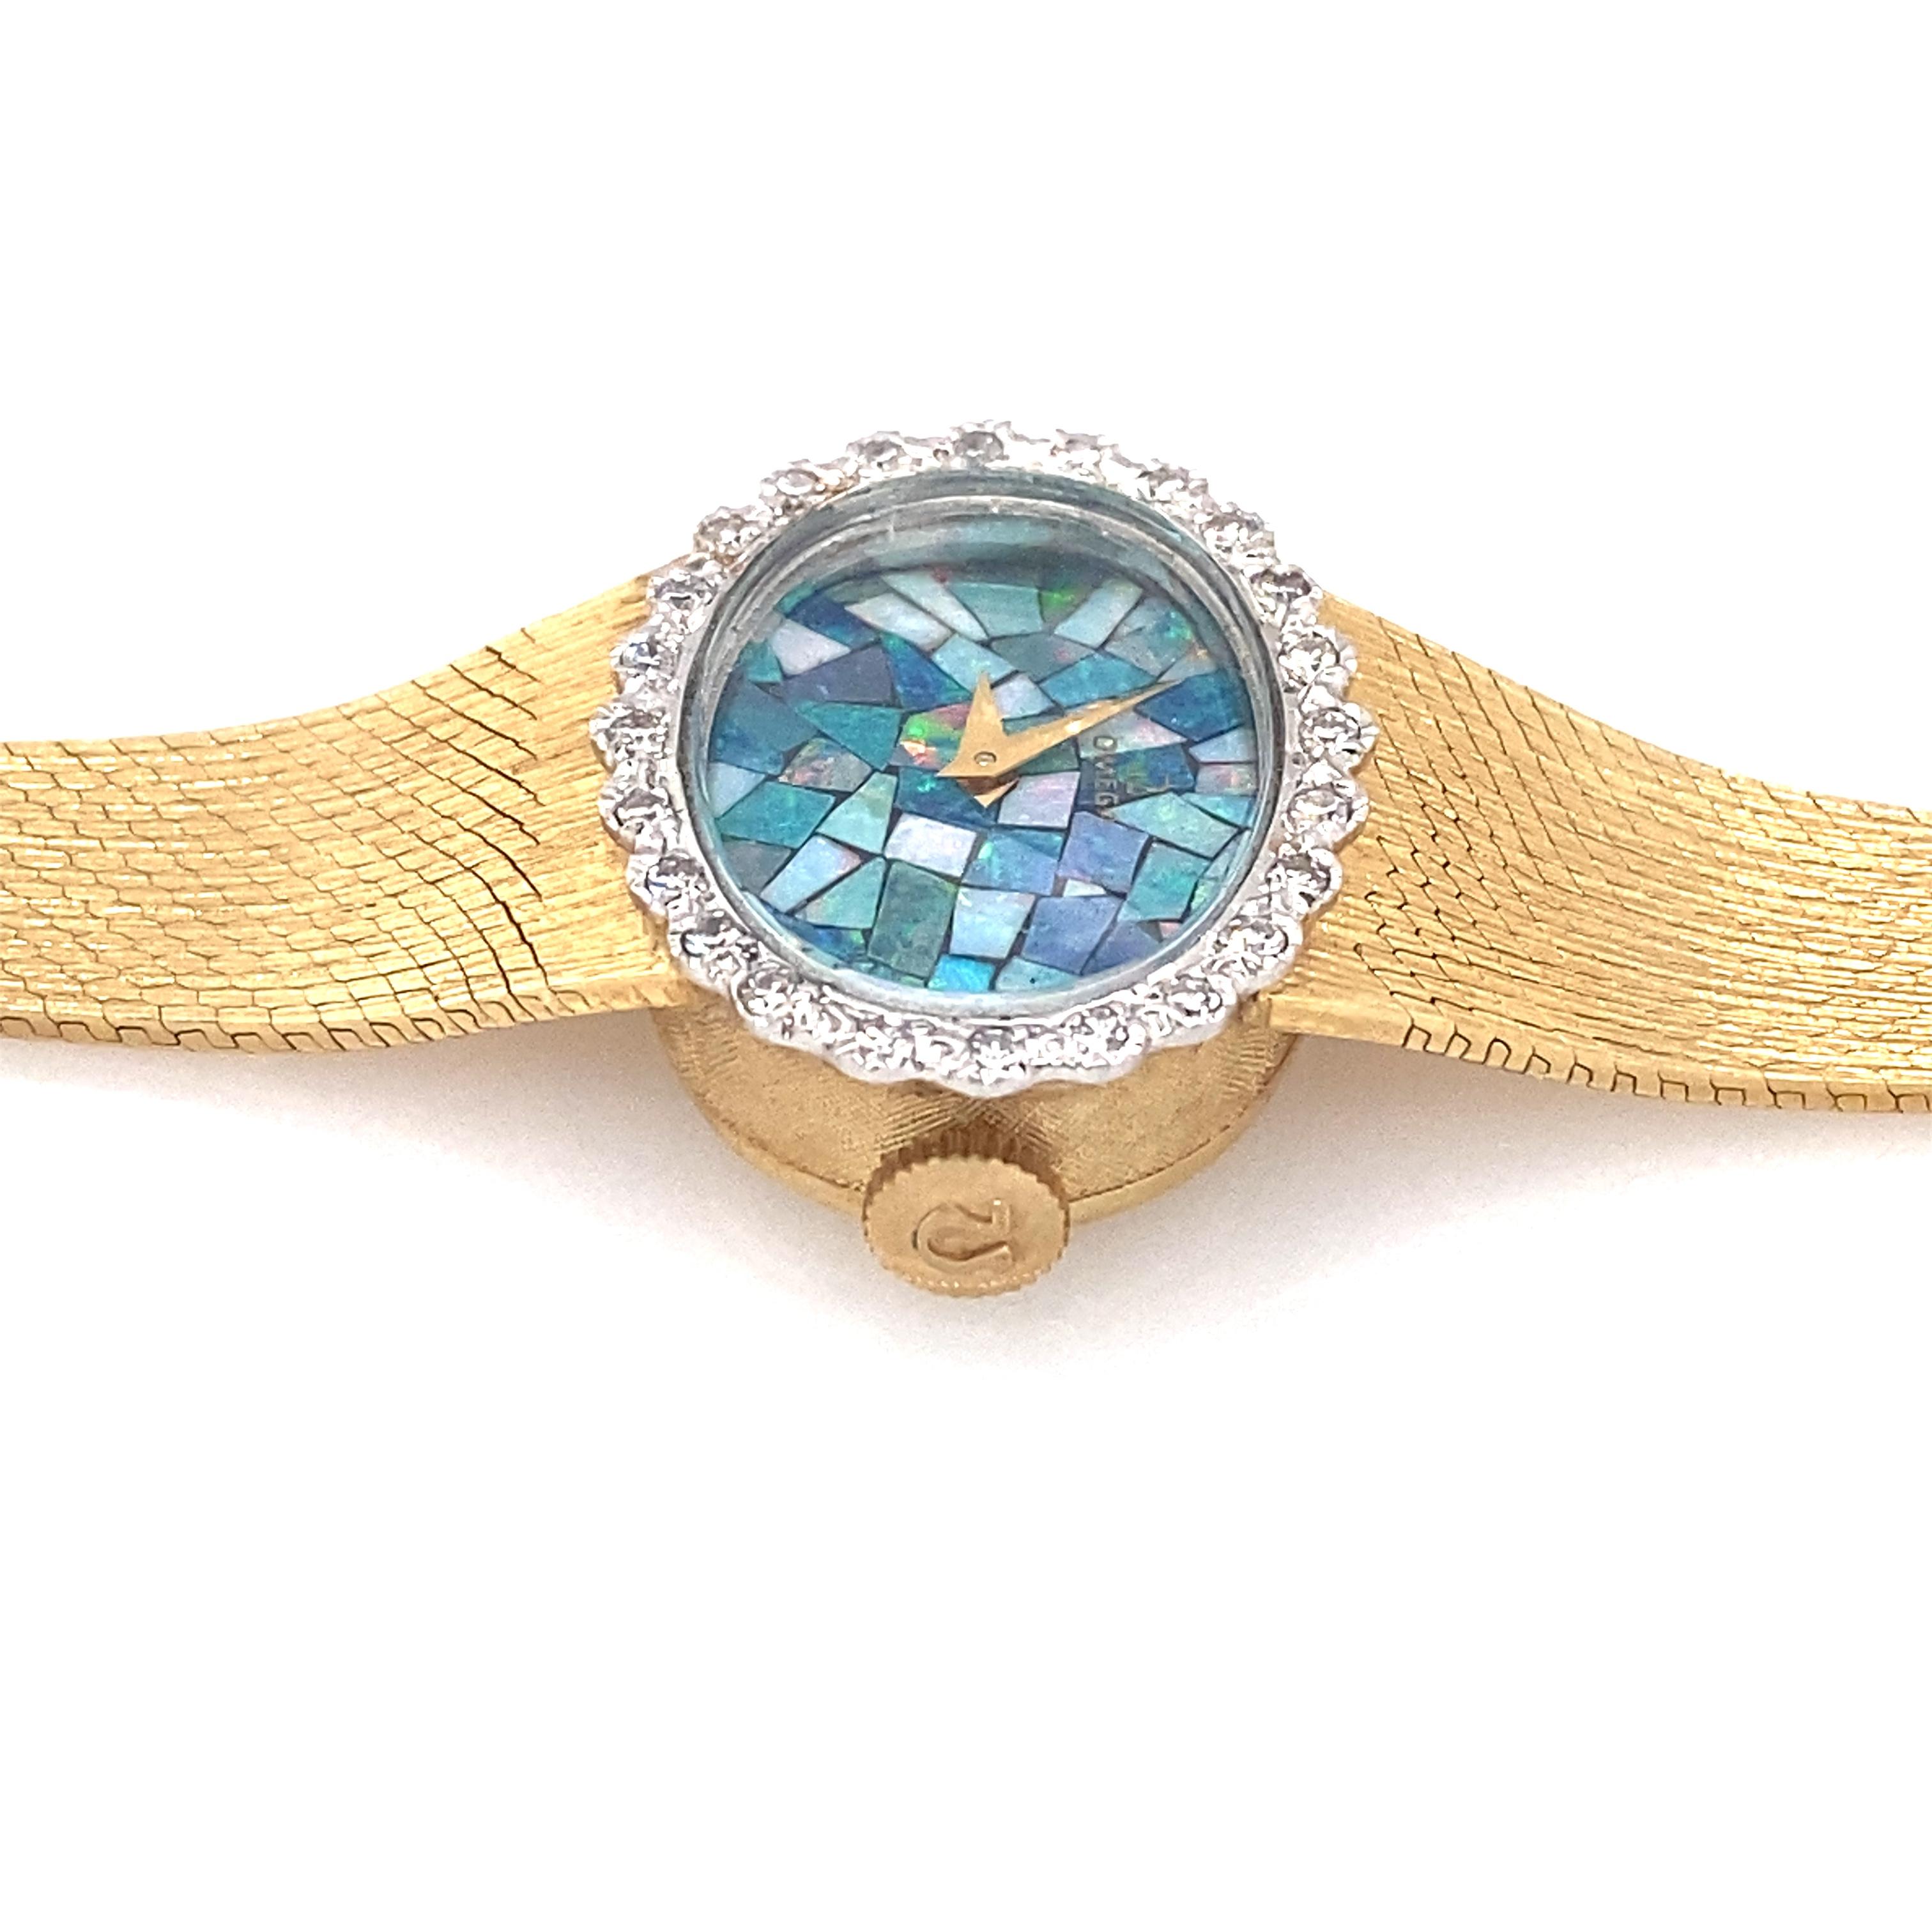 14k gold watches for women's